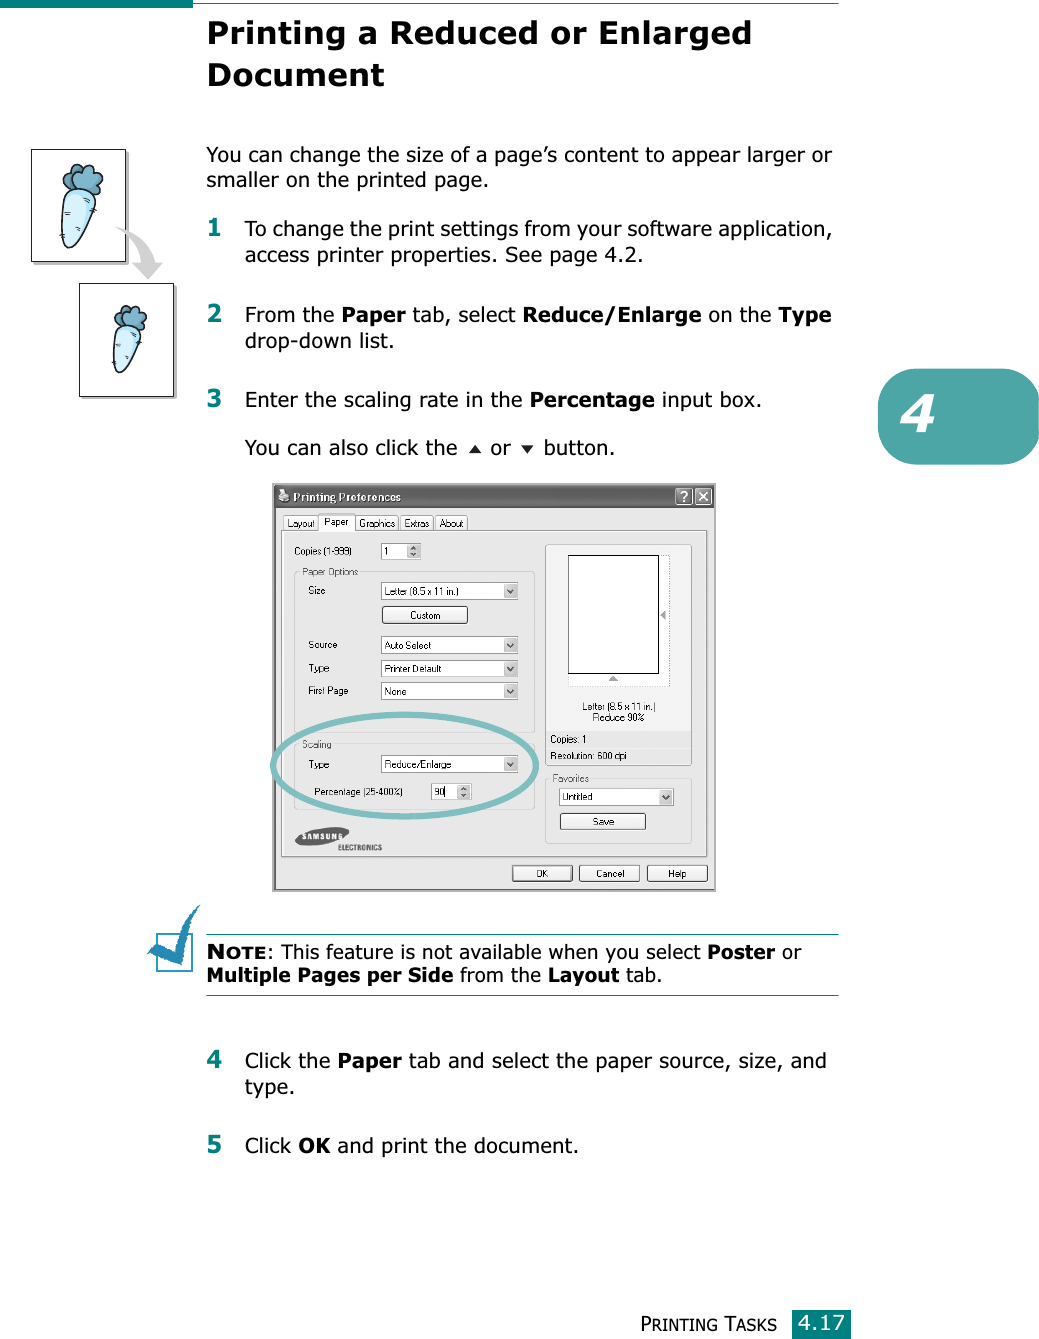 PRINTING TASKS4.174Printing a Reduced or Enlarged DocumentYou can change the size of a page’s content to appear larger or smaller on the printed page. 1To change the print settings from your software application, access printer properties. See page 4.2.2From the Paper tab, select Reduce/Enlarge on the Type drop-down list. 3Enter the scaling rate in the Percentage input box.You can also click the   or   button.NOTE: This feature is not available when you select Poster or  Multiple Pages per Side from the Layout tab.4Click the Paper tab and select the paper source, size, and type. 5Click OK and print the document. 